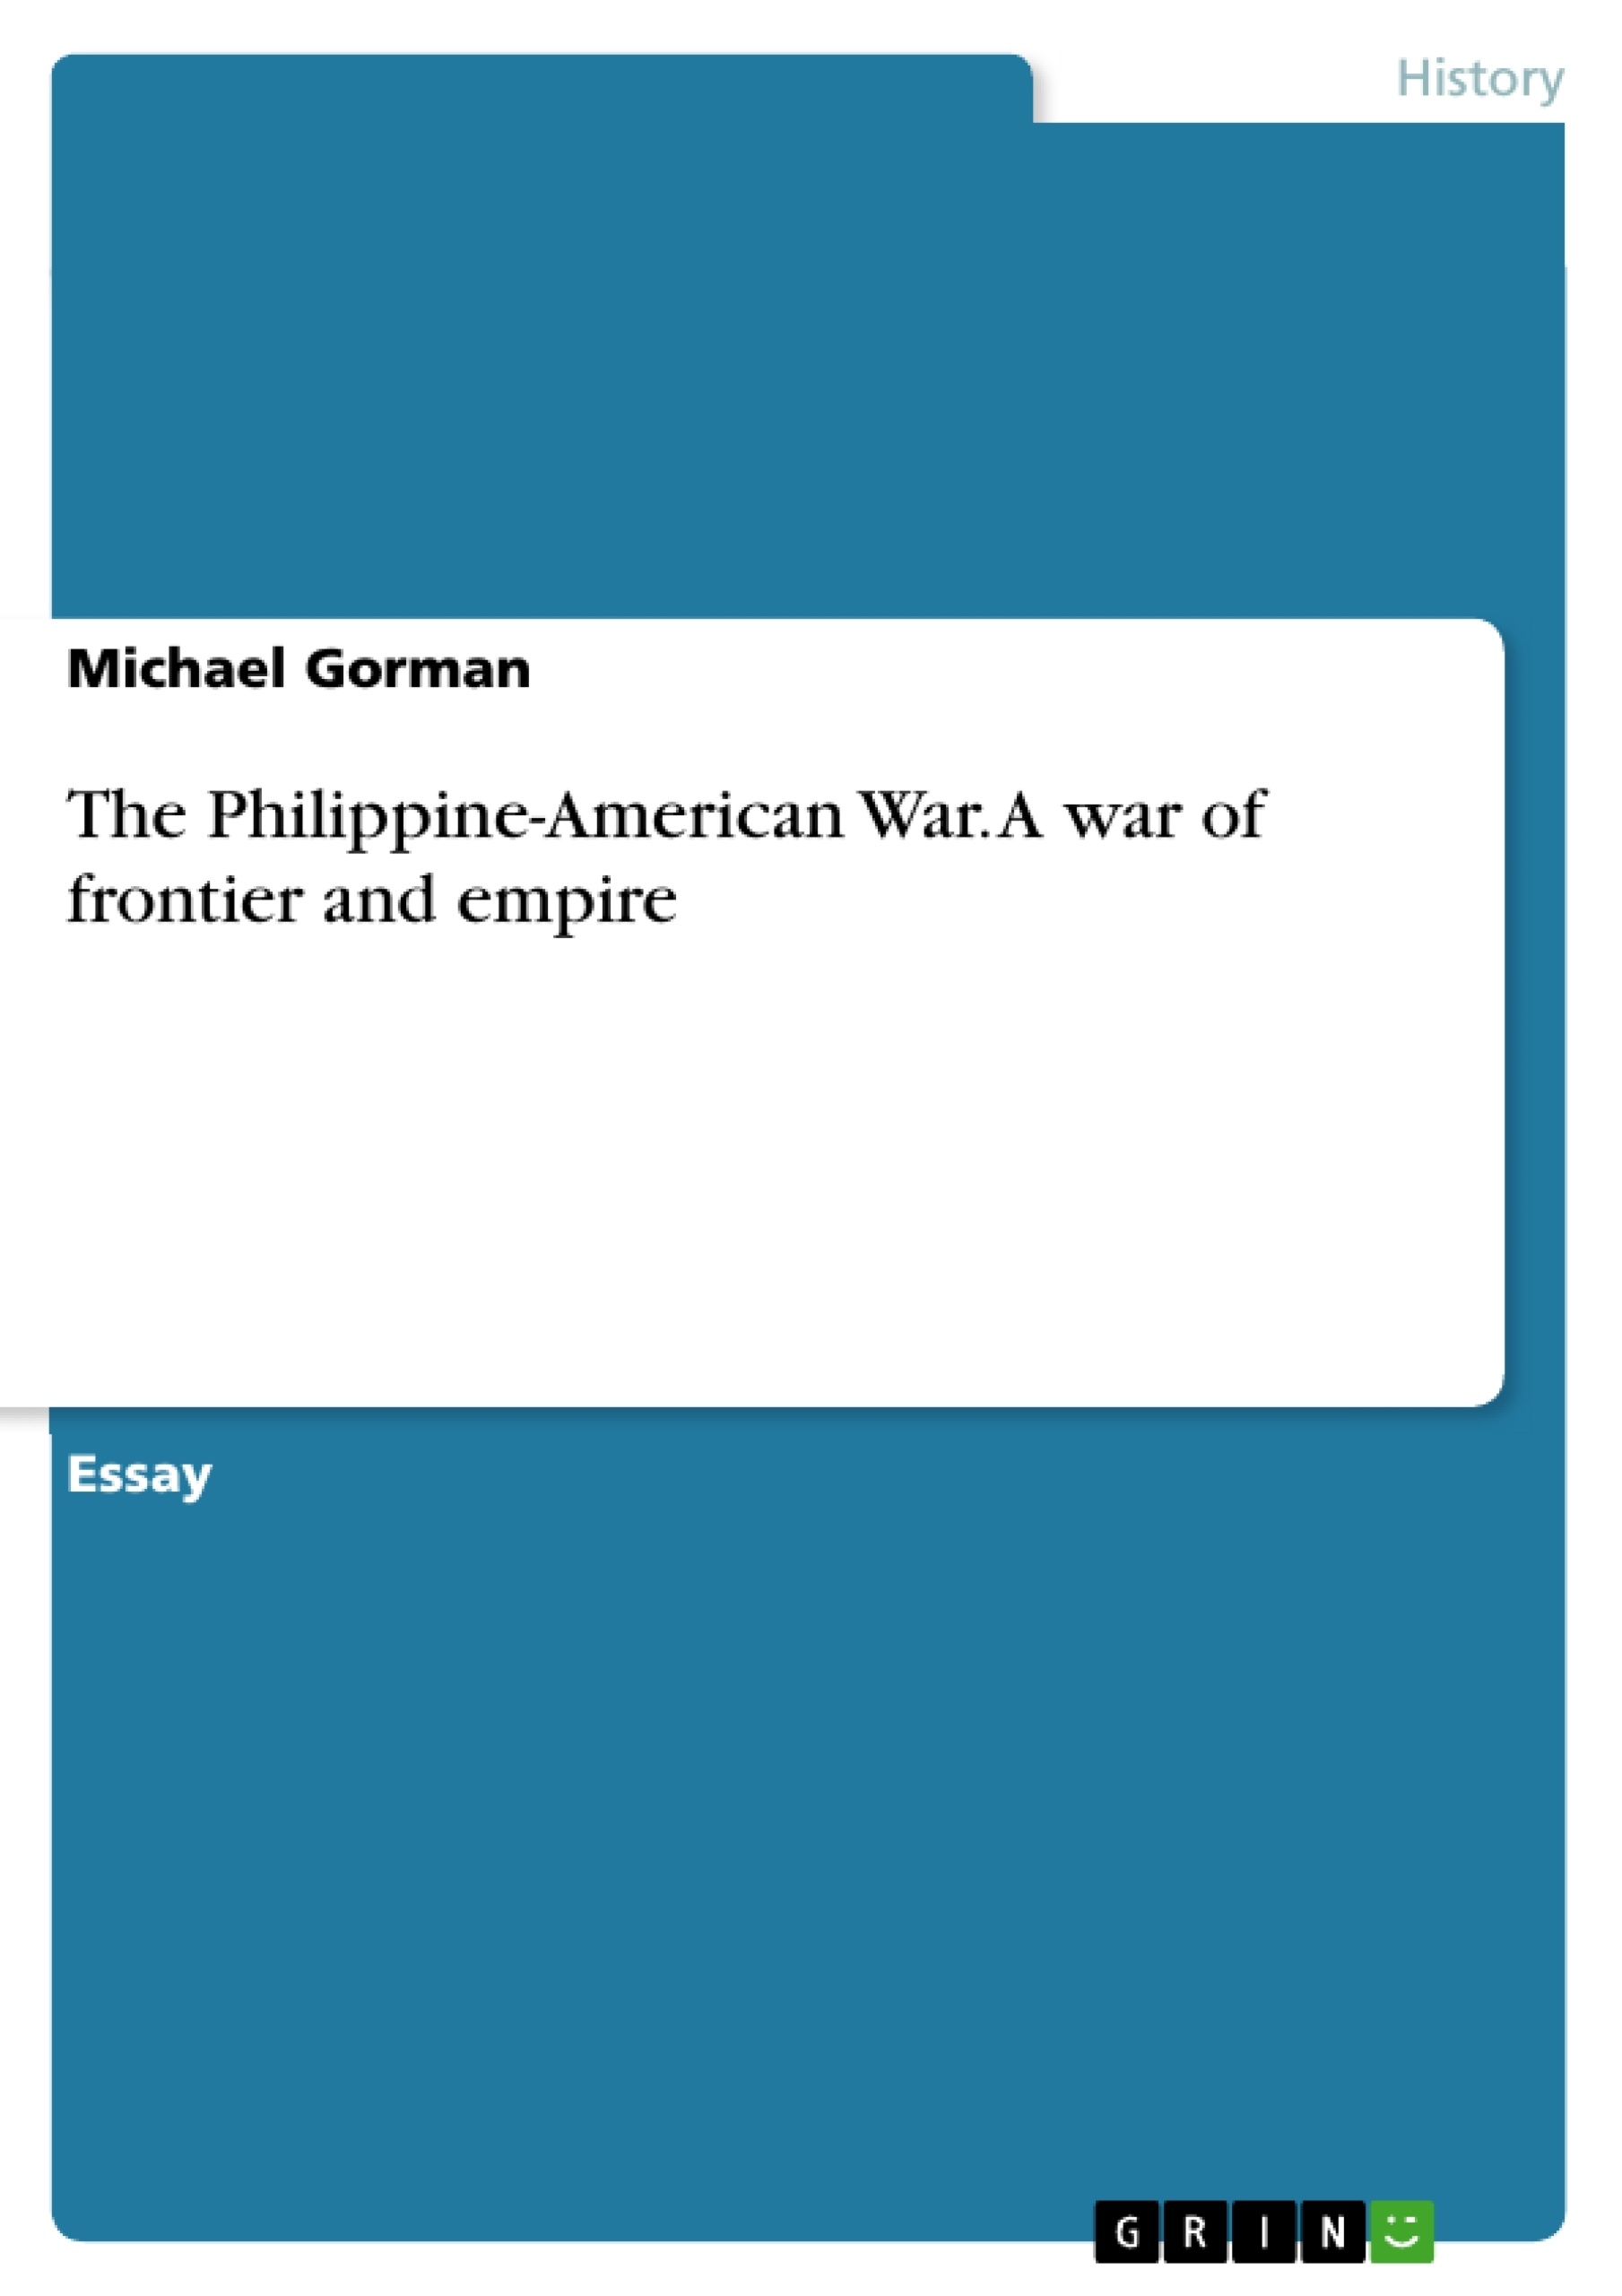 Titre: The Philippine-American War. A war of frontier and empire